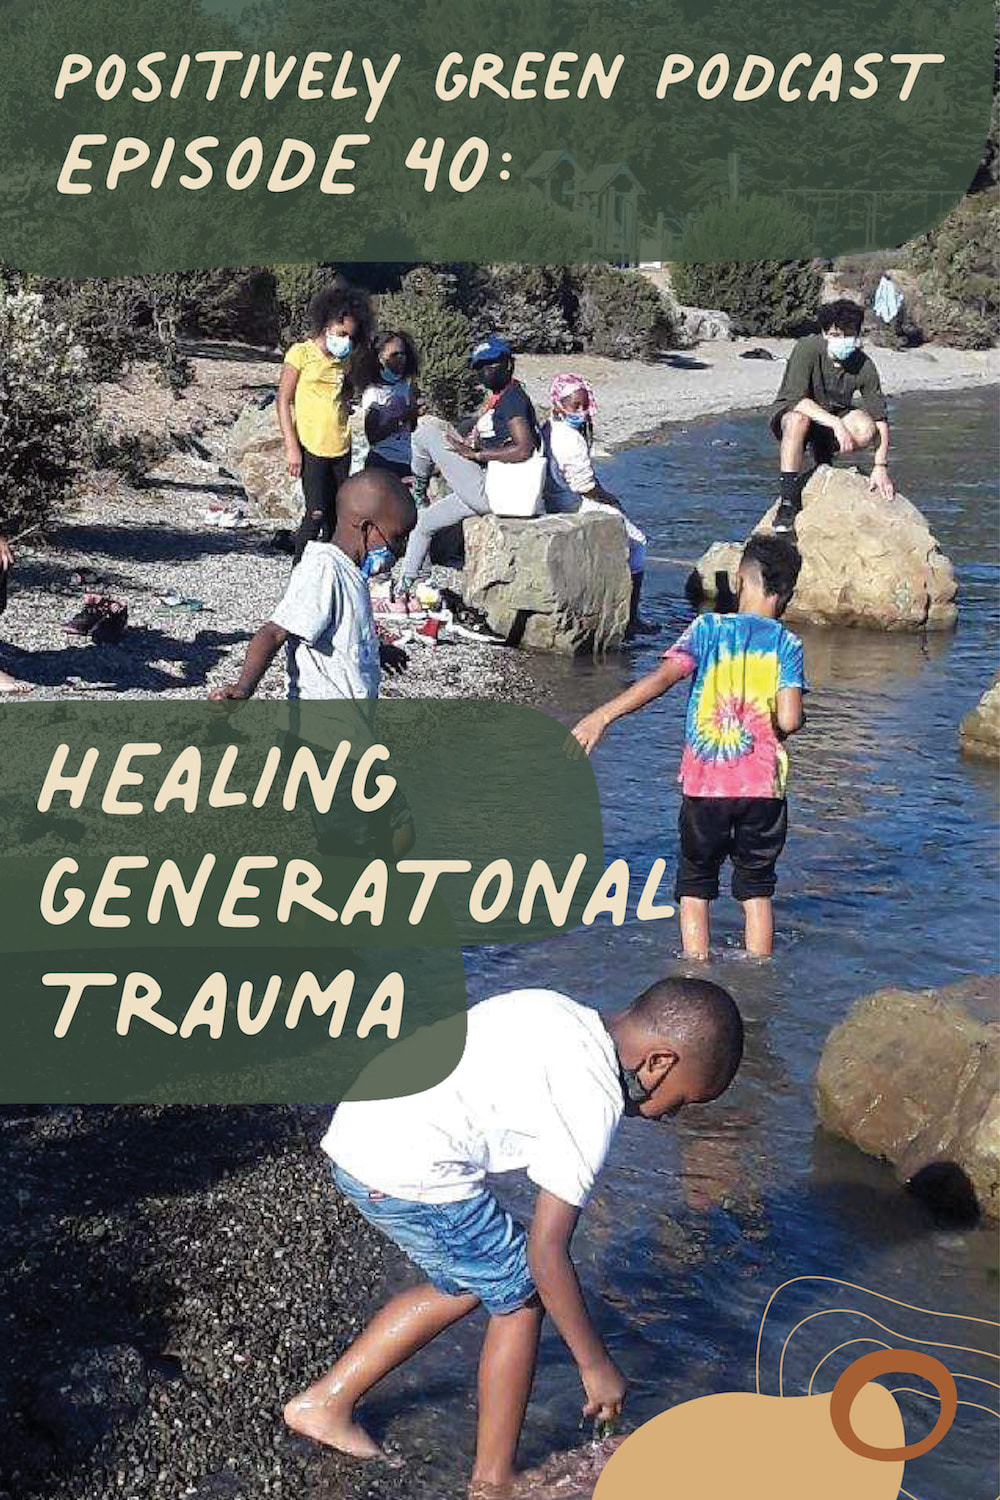 Episode 40 Healing Generational Trauma connecting with nature and community organizing with Curtis Lee